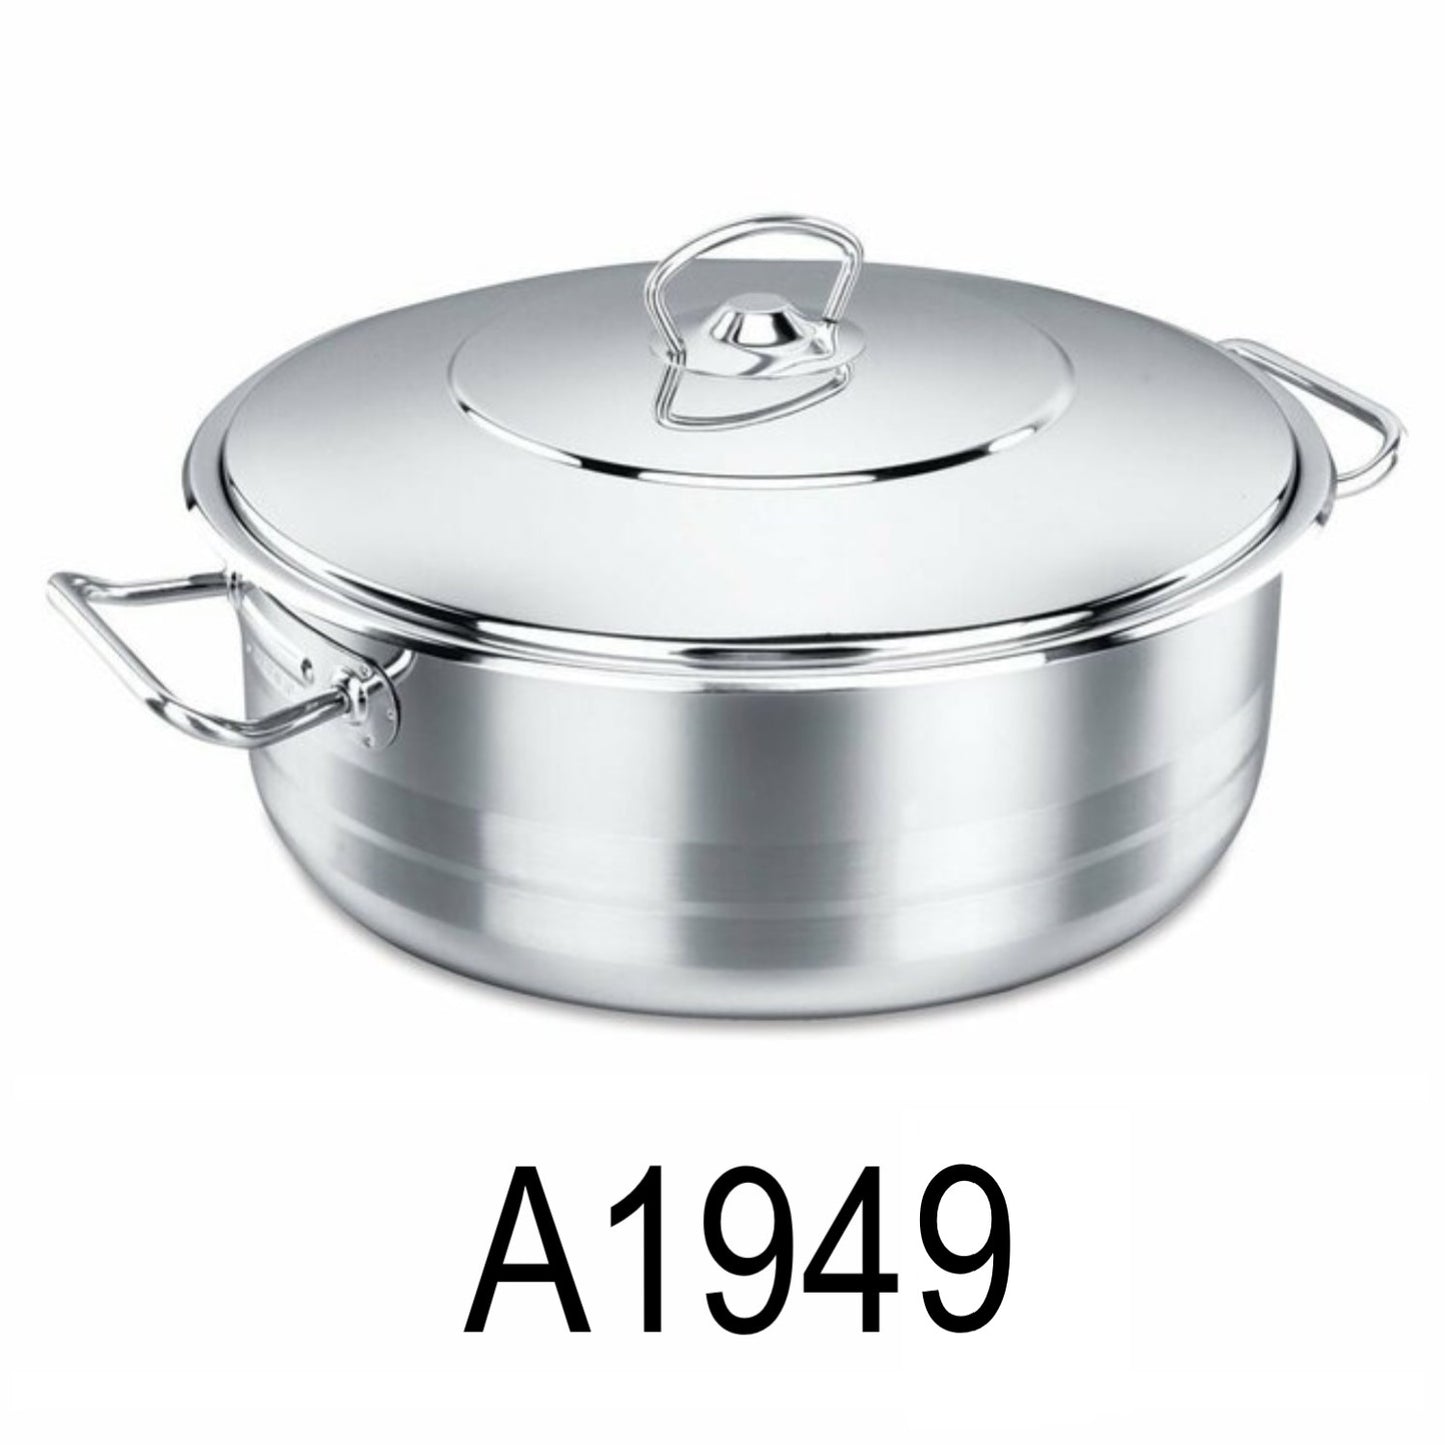 30L Stainless Steel Low Pot